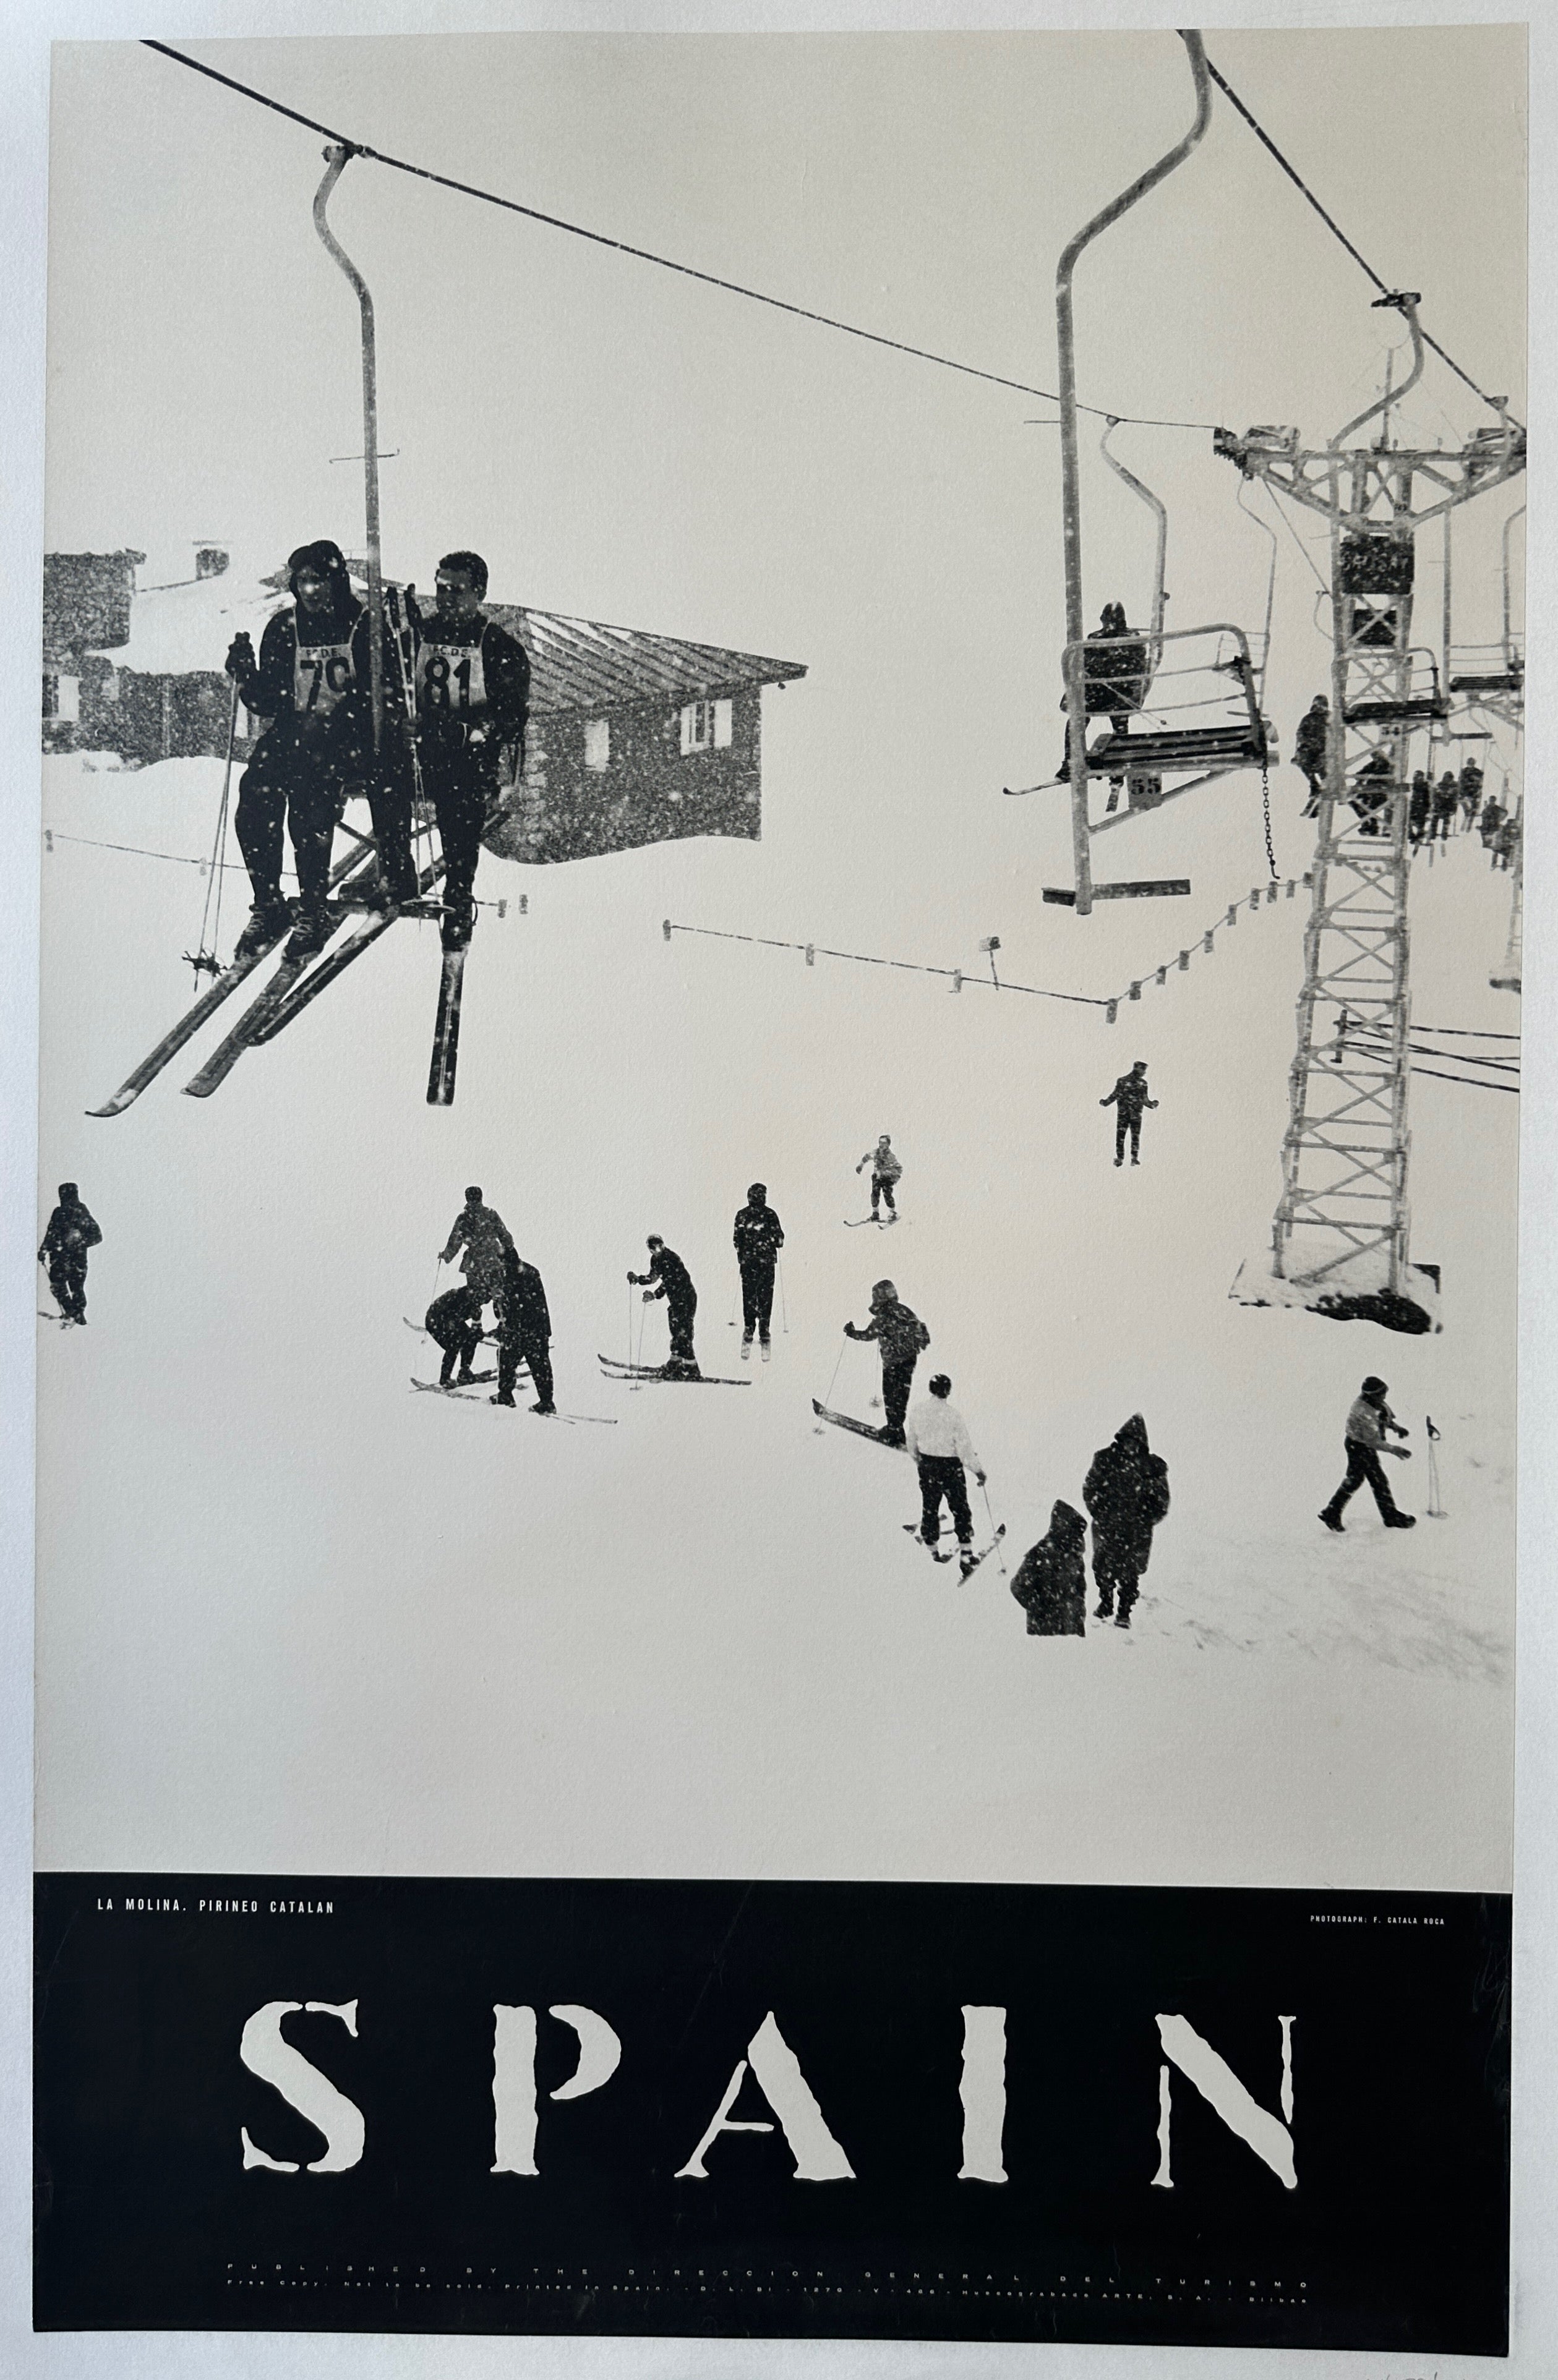 35x39.5 linen backed travel poster for Spain featuring a black and white photograph of people skiing